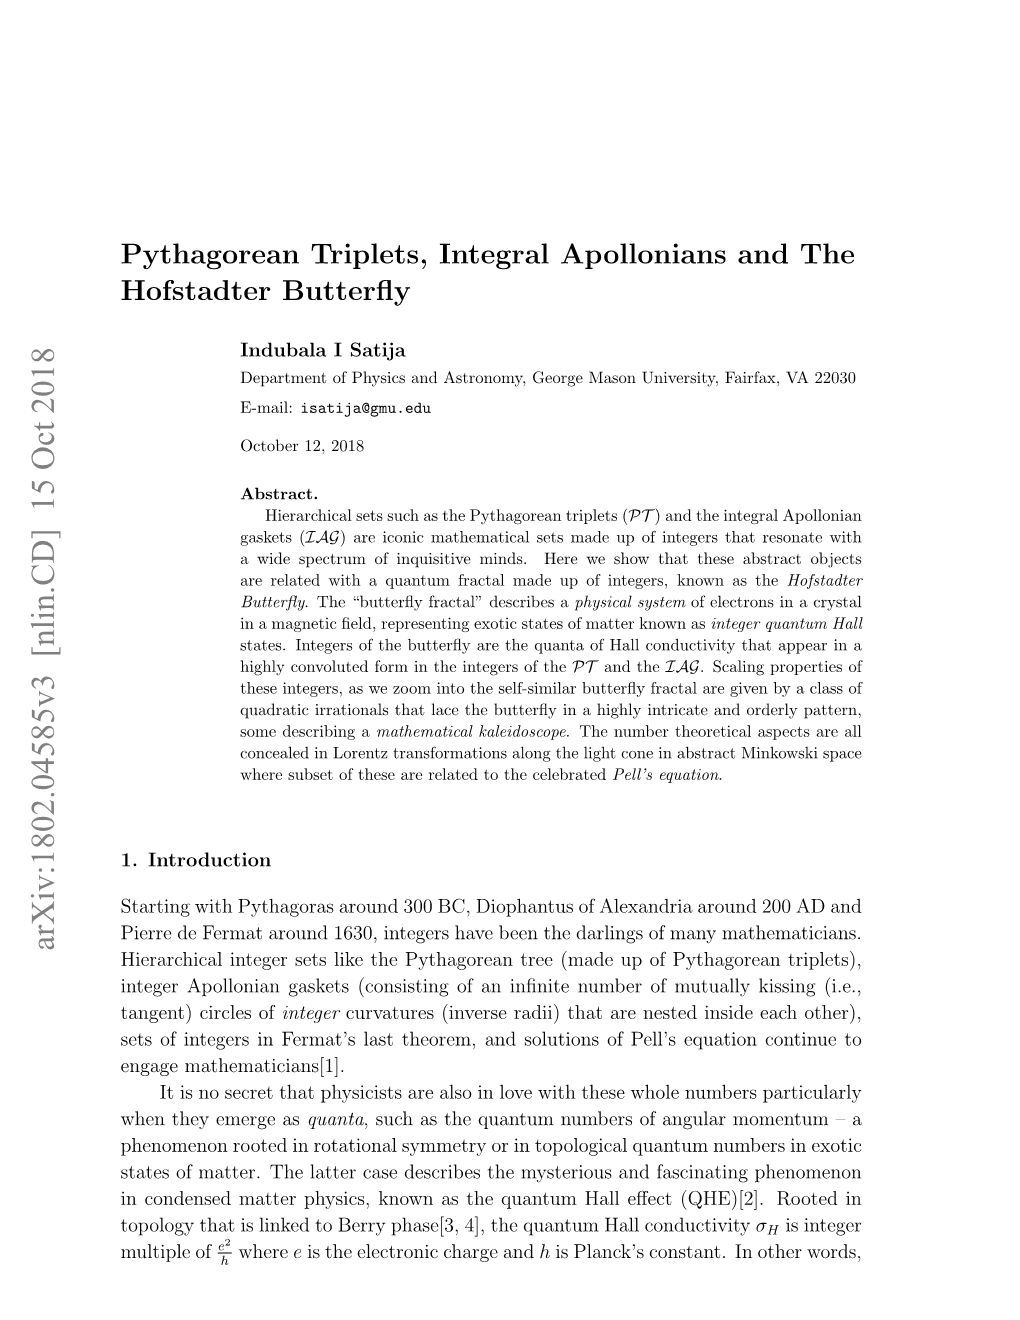 Pythagorean Triplets, Integral Apollonians and the Hofstadter Butterﬂy